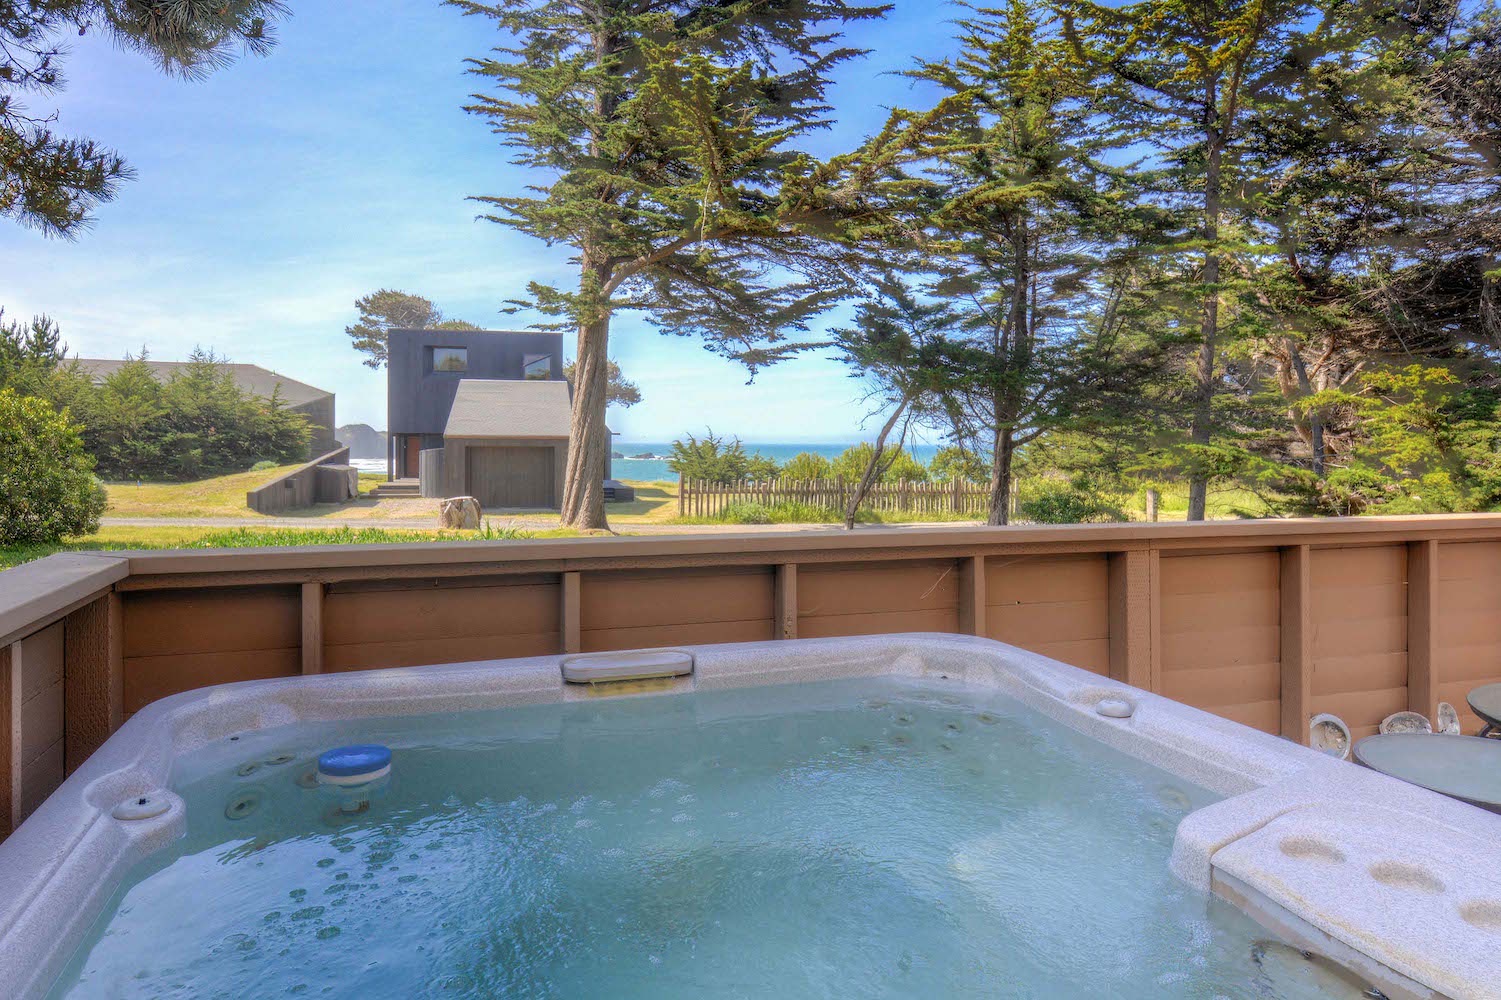 Private hot tub with ocean view